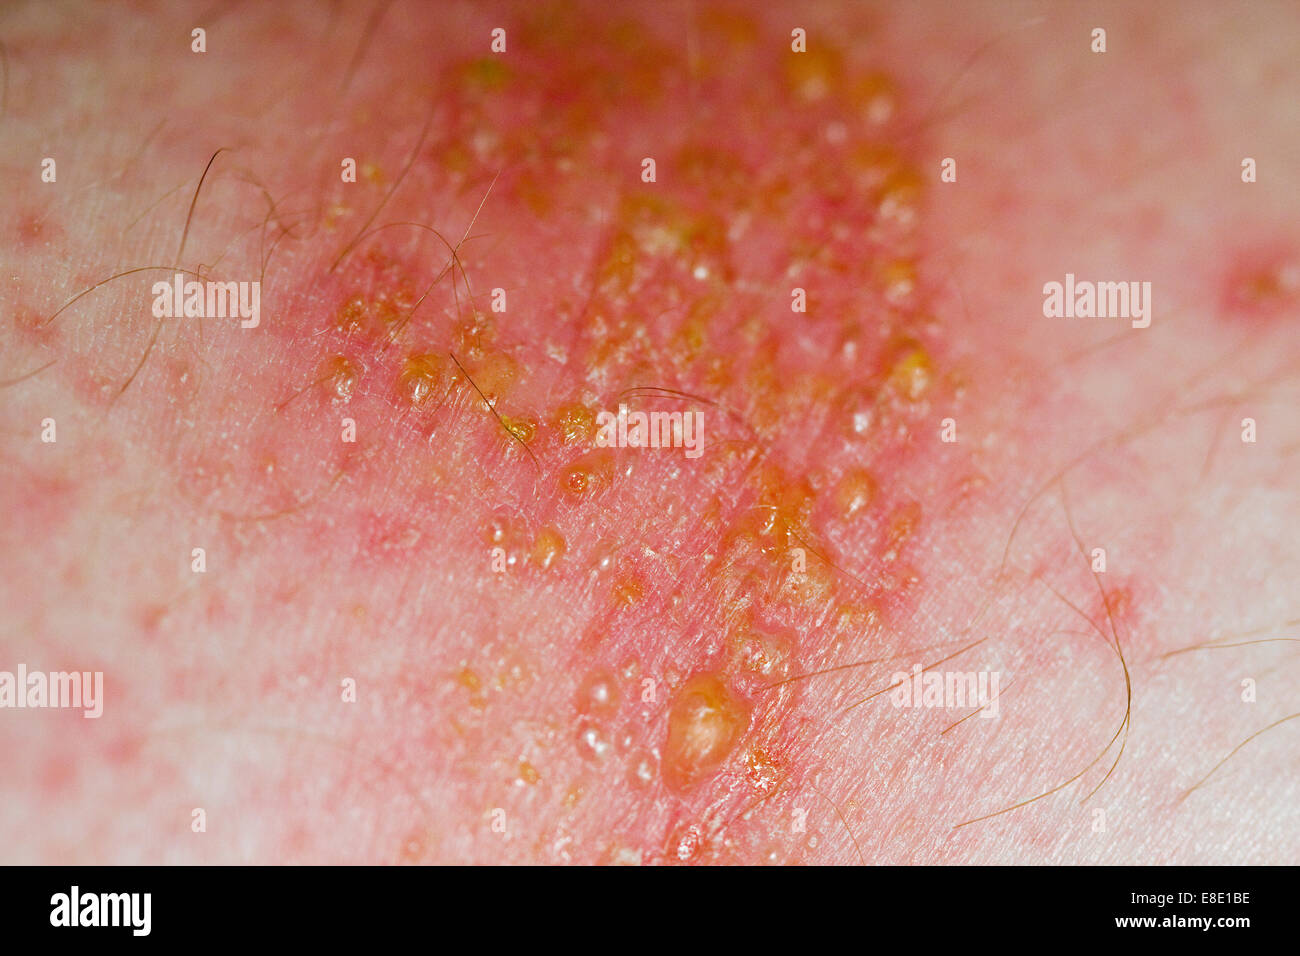 Non-Bullous impetigo infection on the surface of skin caused by either staphylococcus aureus or streptococcus pyogenes bacteria Stock Photo